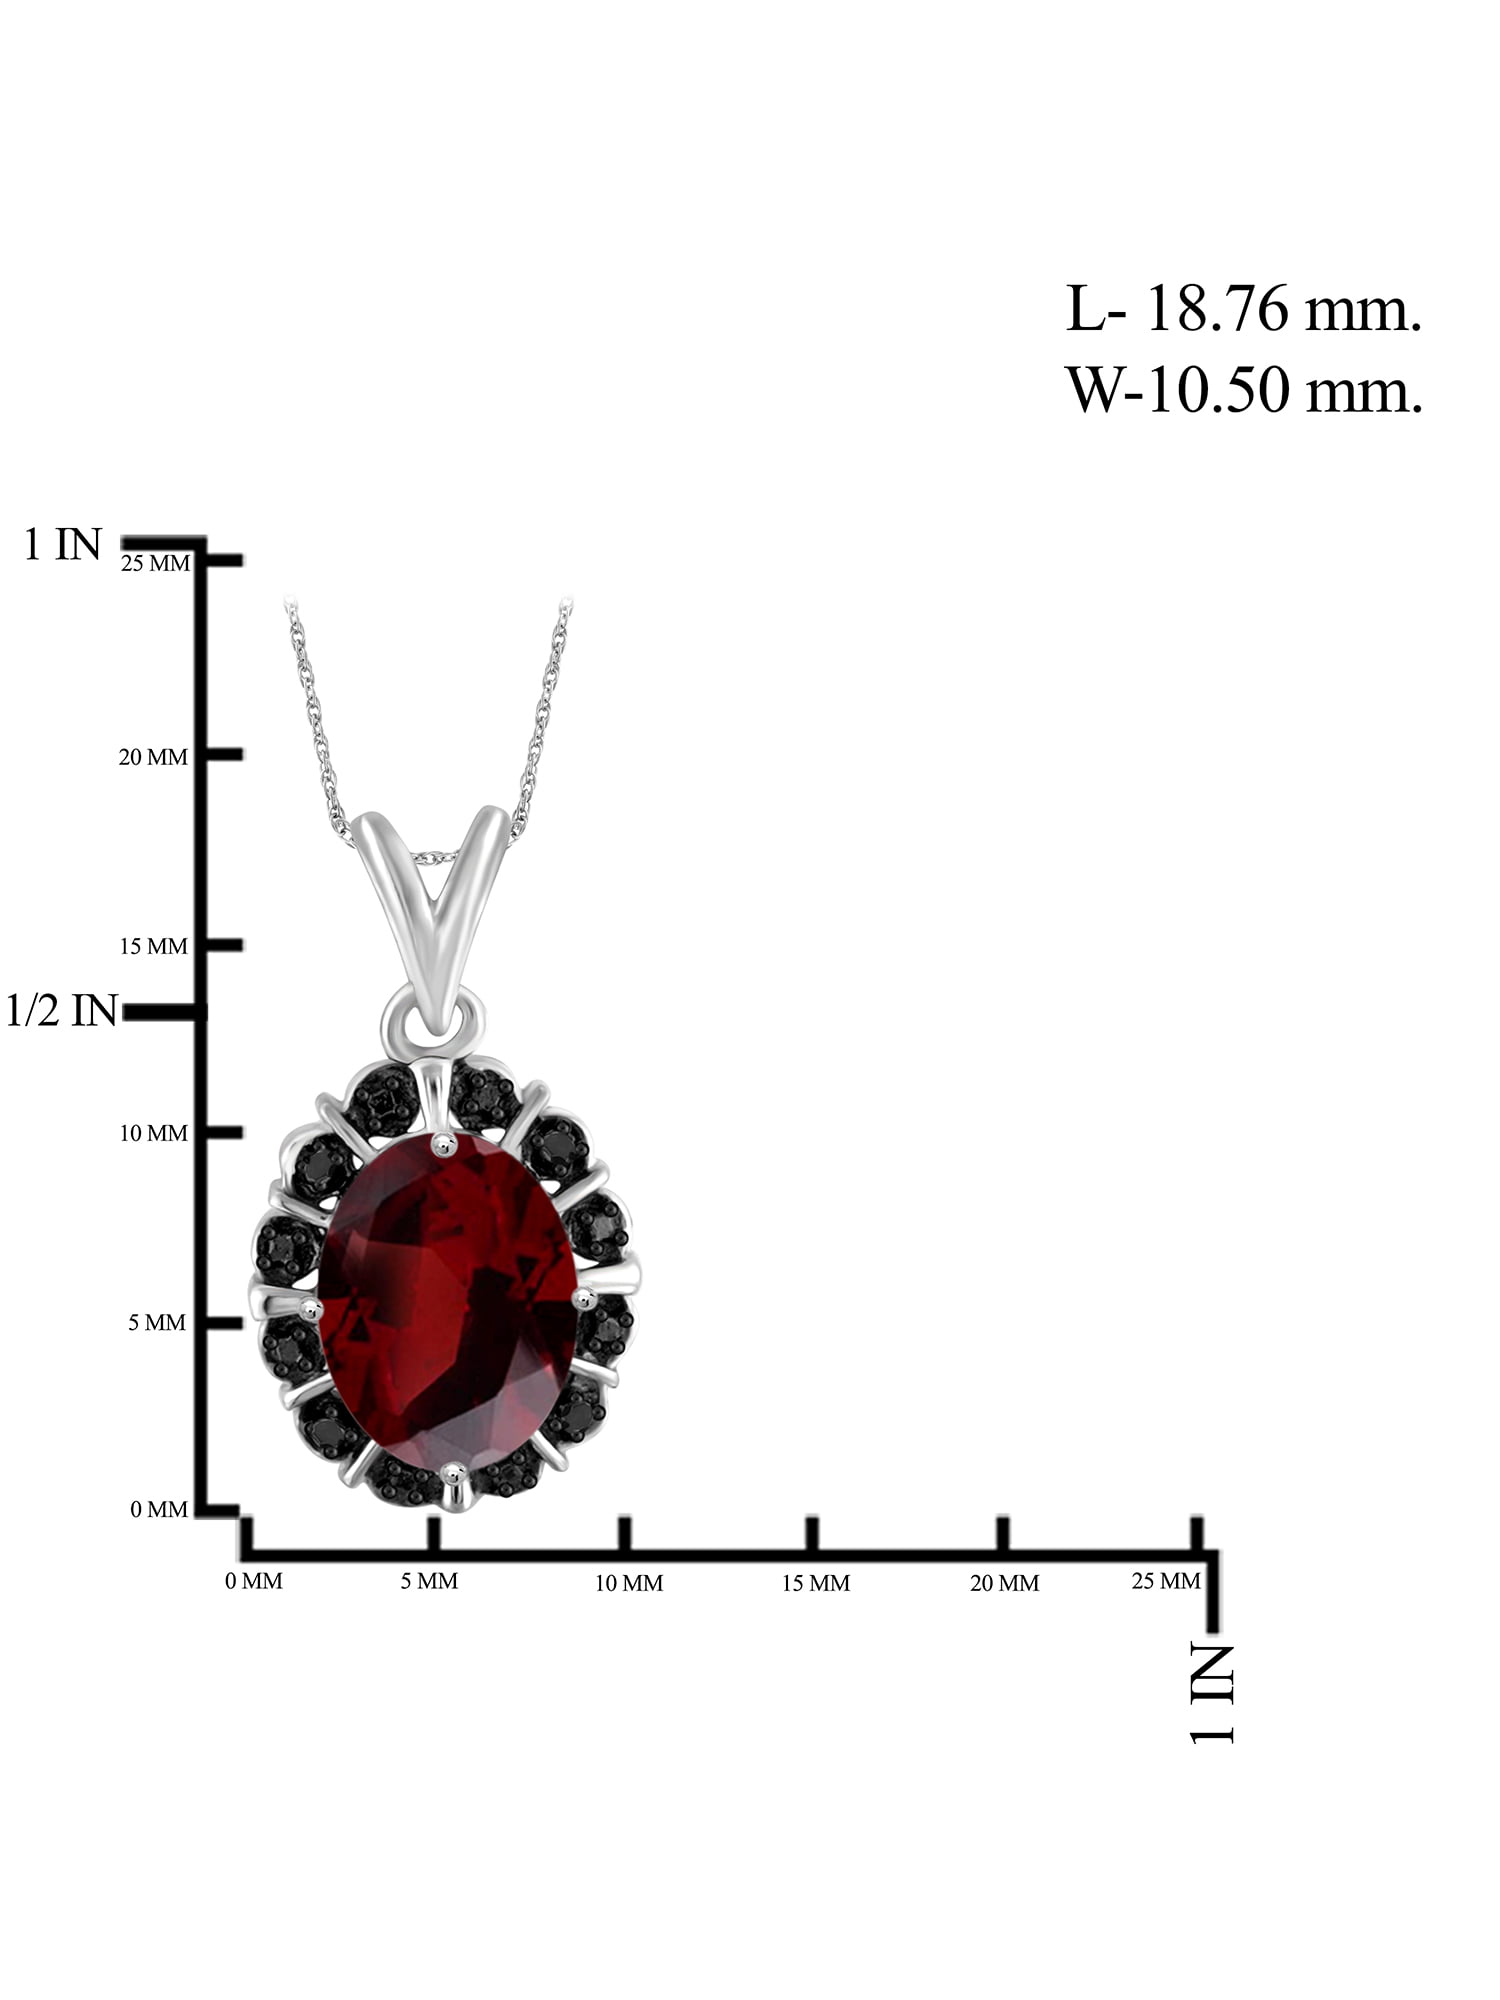 Amazon.com: 925 Sterling Silver Garnet Necklace - Dainty 12mm Round  Gemstone Pendant, January Aquarius Birthstone, Delicate Handmade Jewelry,  Vintage Antique Style Basic Jewel, Perfect Gift for Classy Women : Handmade  Products